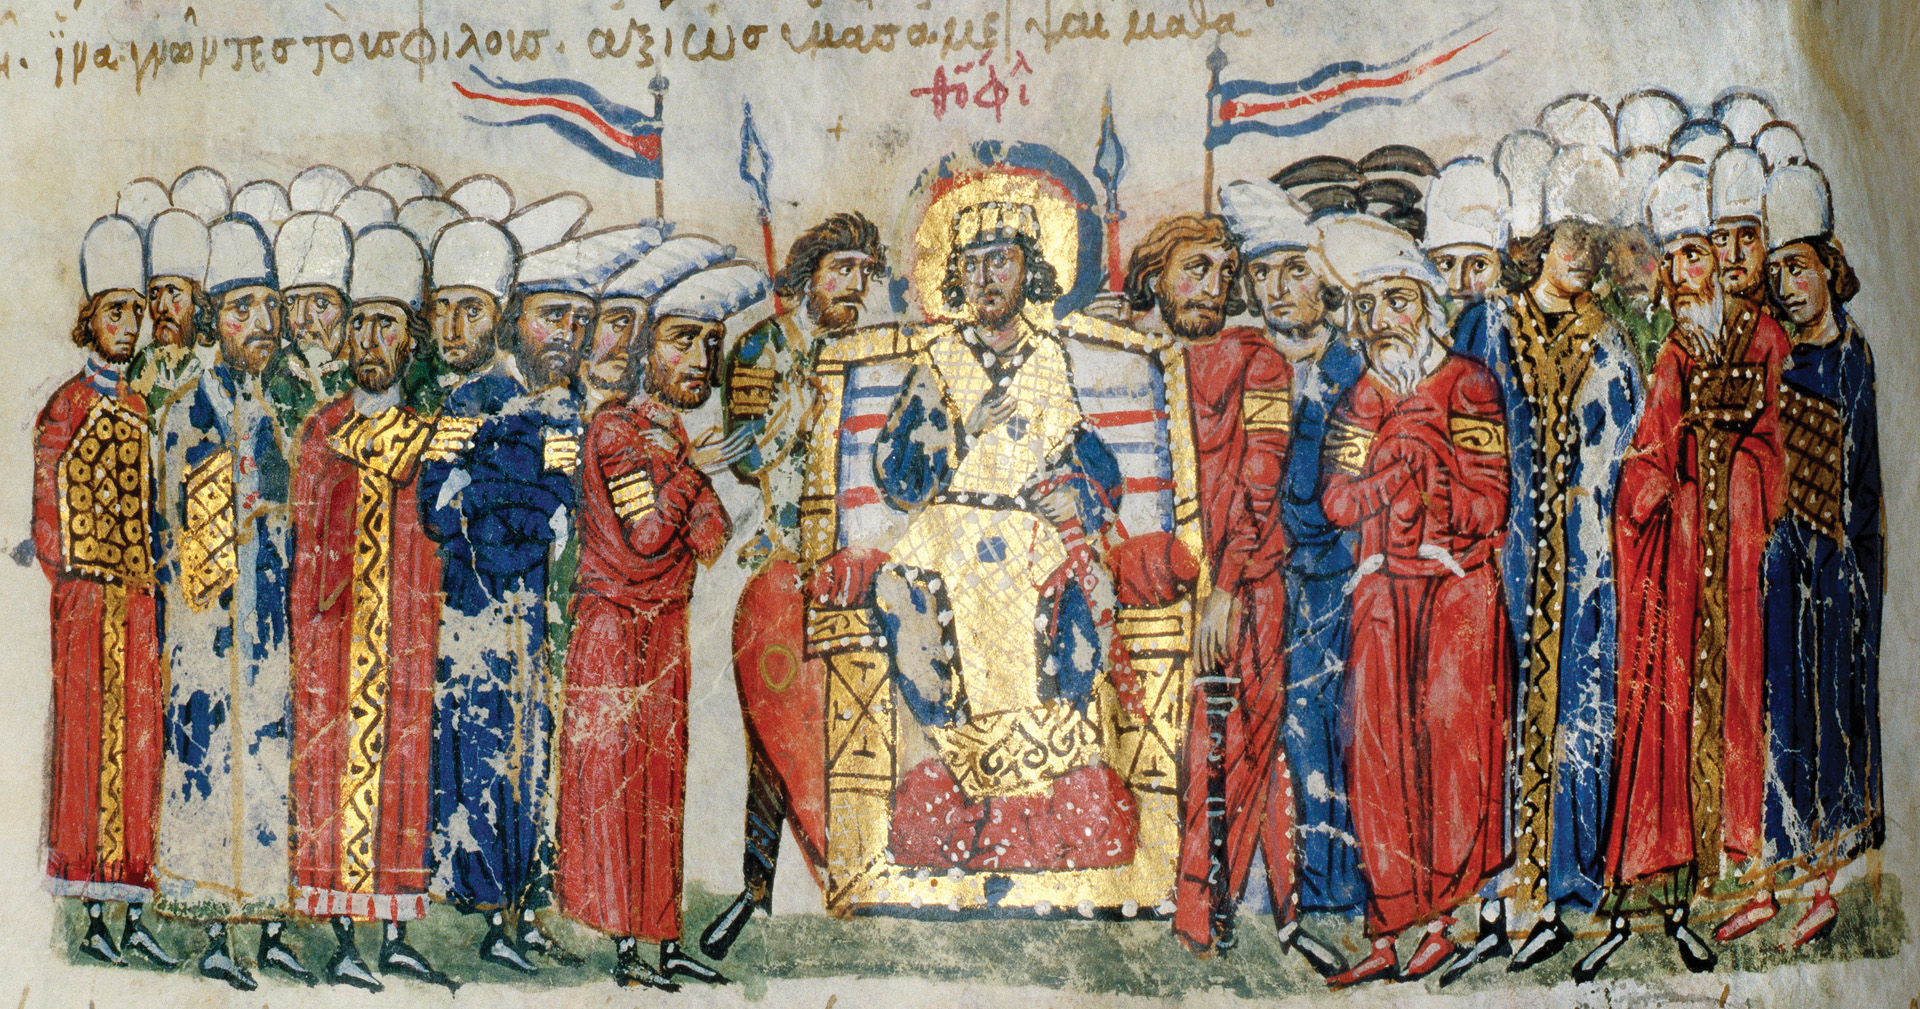 Byzantine Emperor Theophi- los is flanked by soldiers from the Varangian Guard. Norsemen who raided the eastern shores of the Baltic Sea were called Varangians. They fought and died for the Byzantine emperor over the course of 400 years.